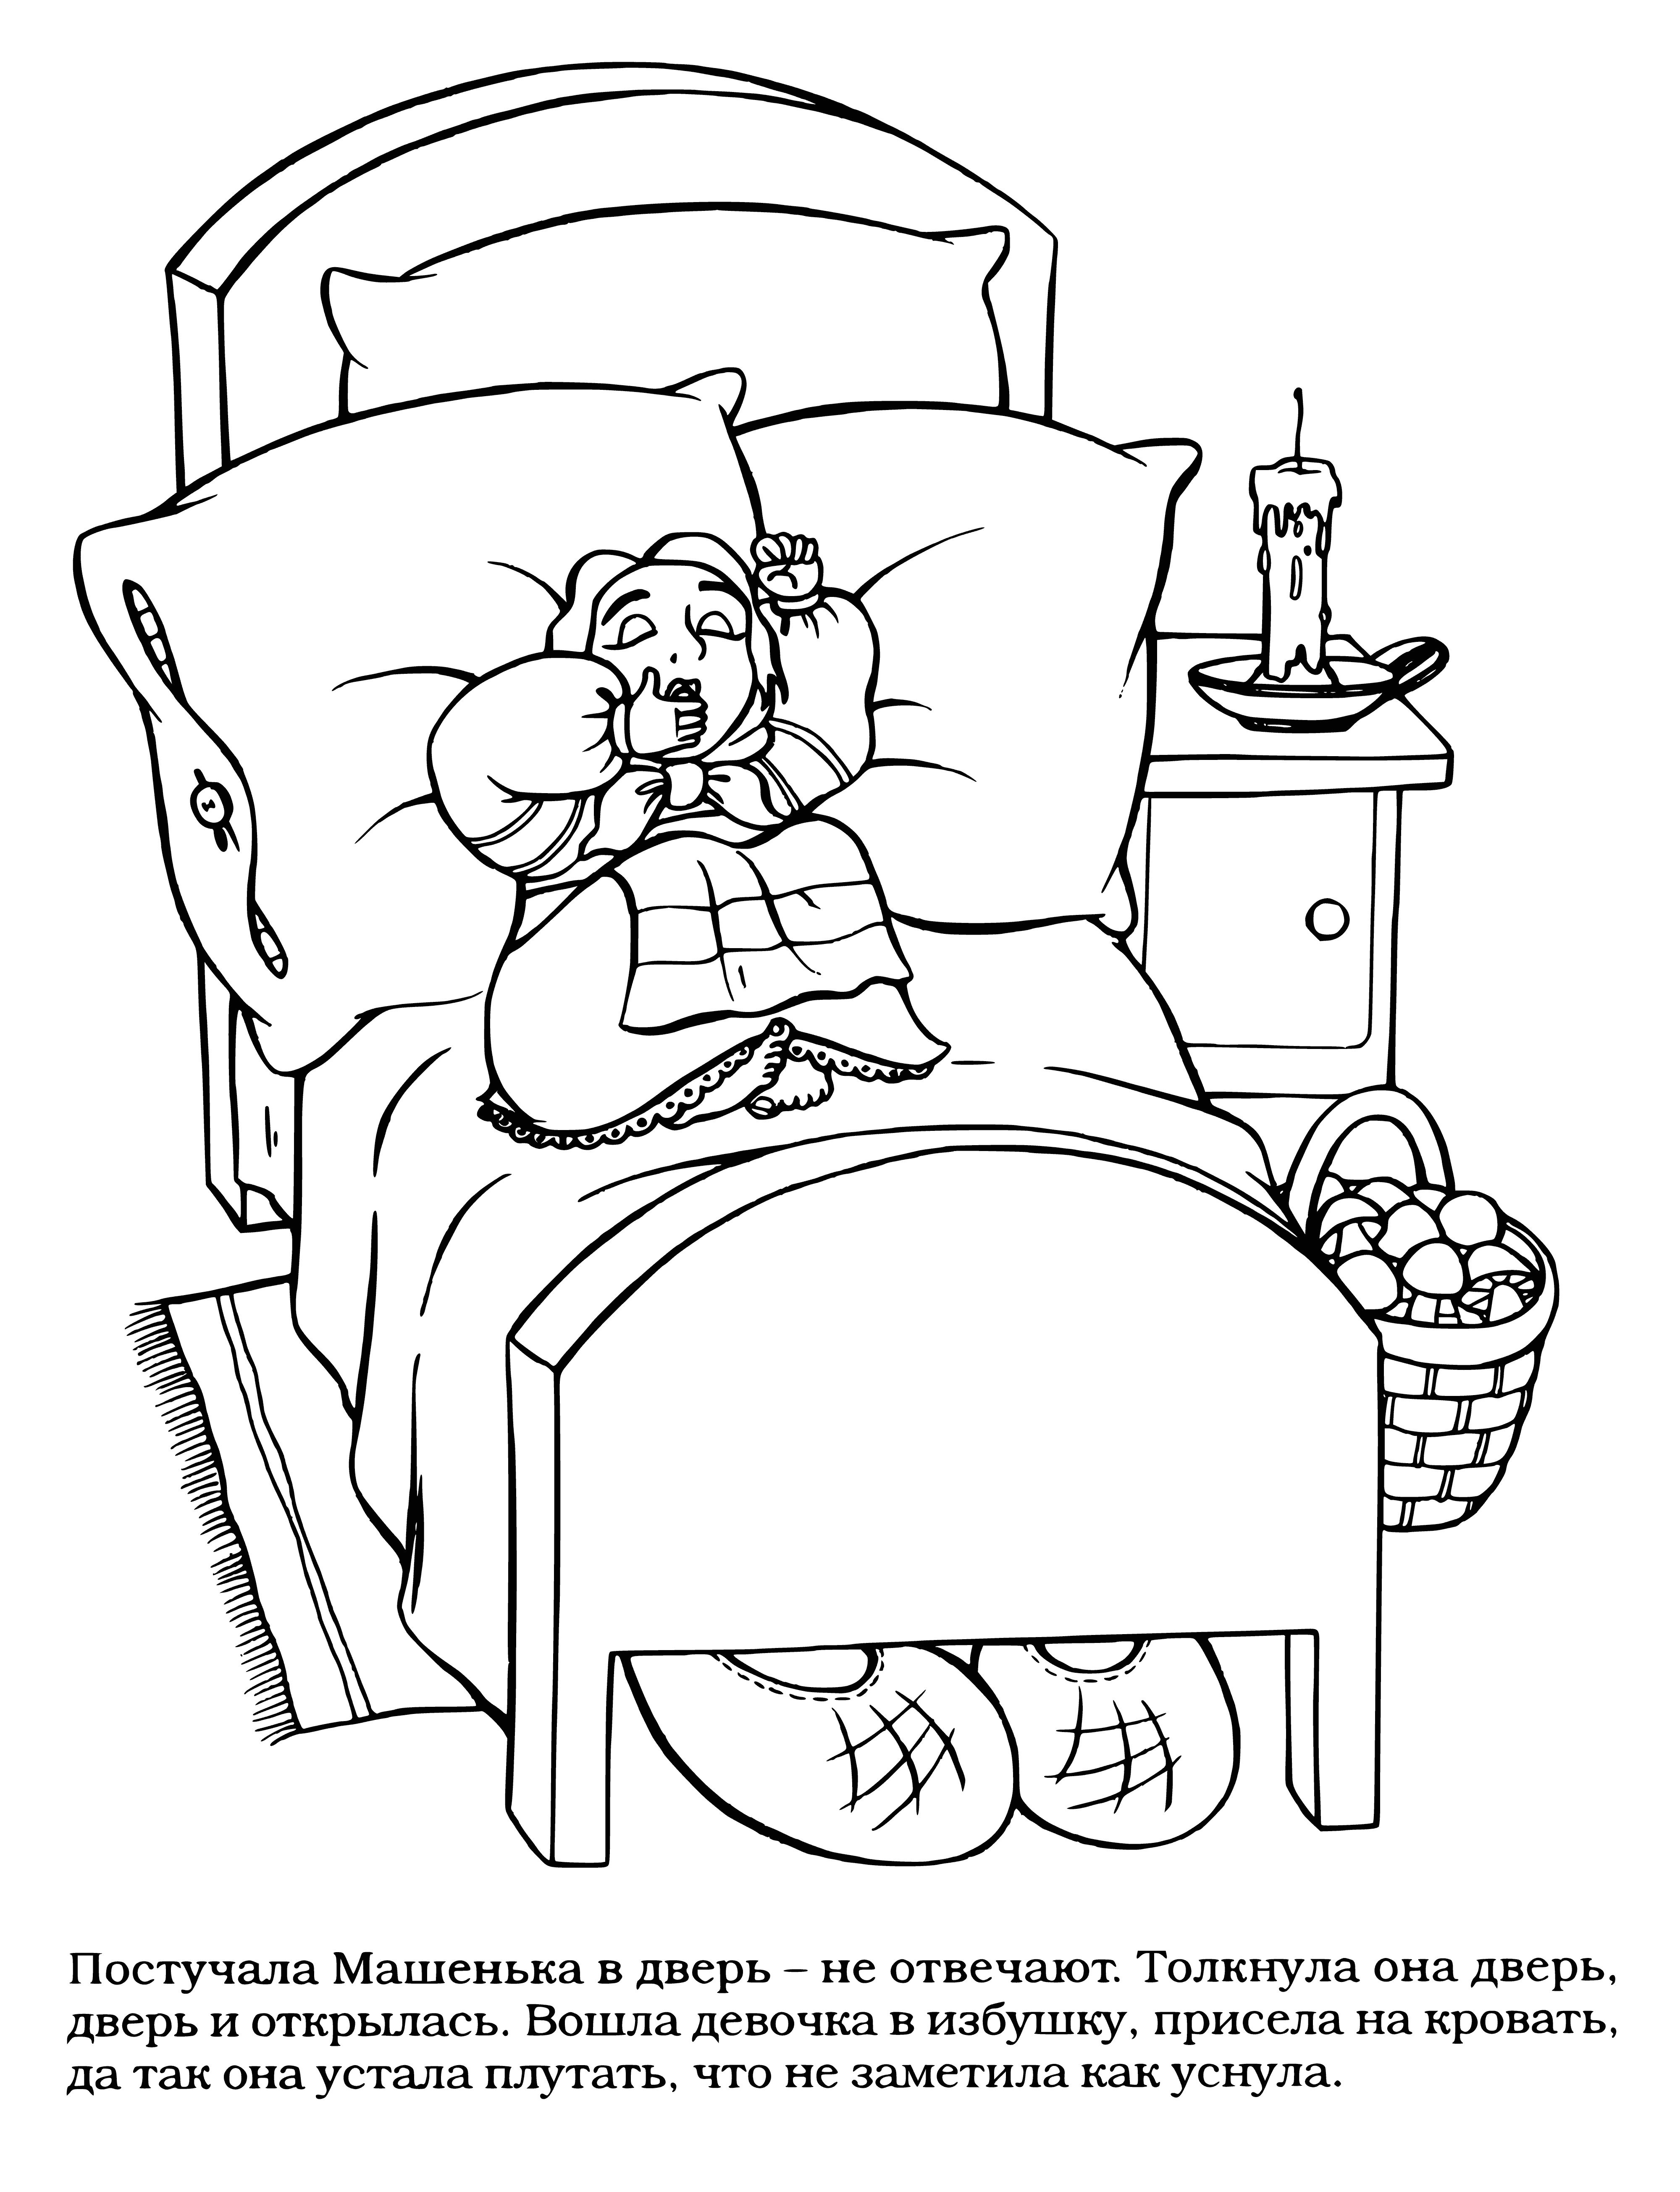 coloring page: Masha sits on a bed, worried, in a room with a window. #Loneliness